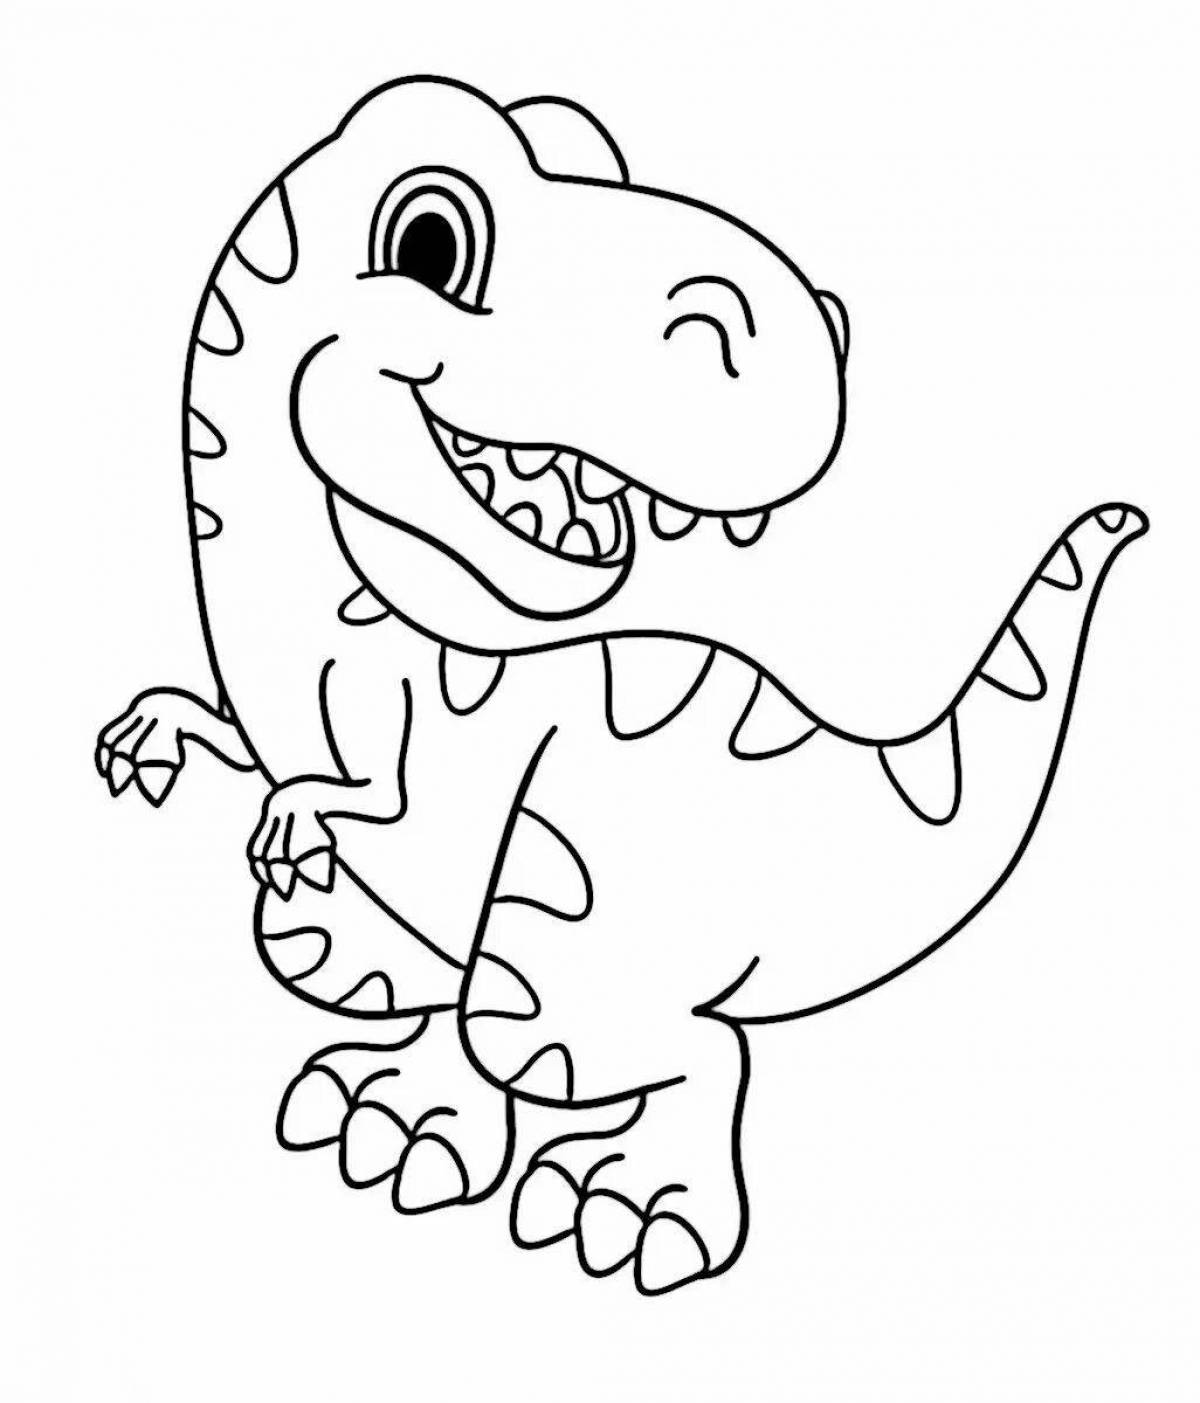 Glitter drawings of dinosaurs for coloring